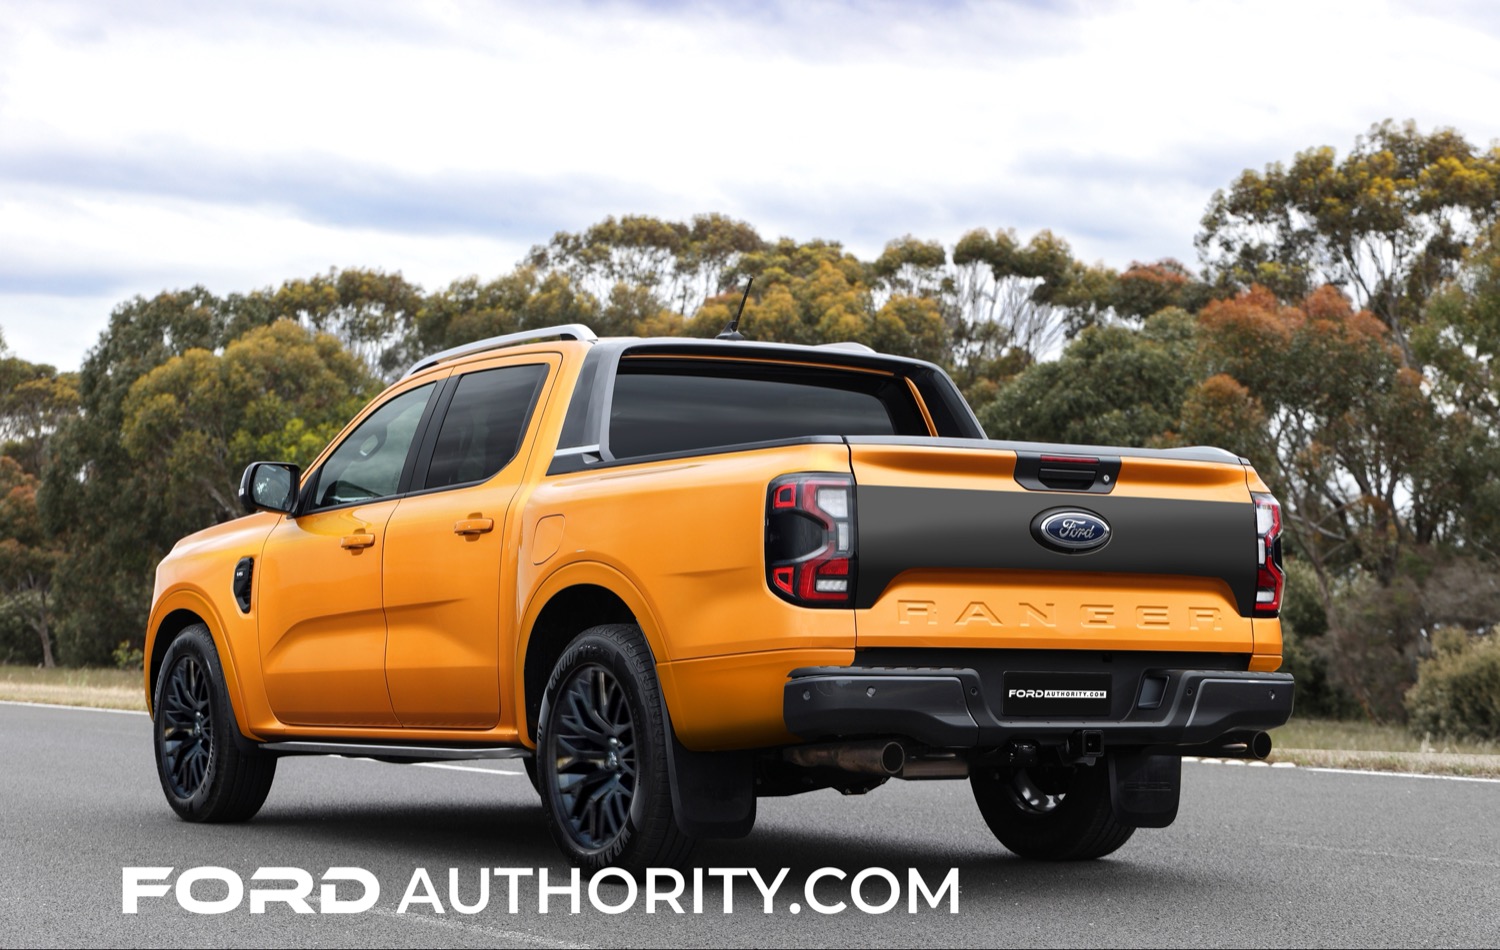 2023 Ford Ranger ST Rendered As Hypothetical Performance Pickup